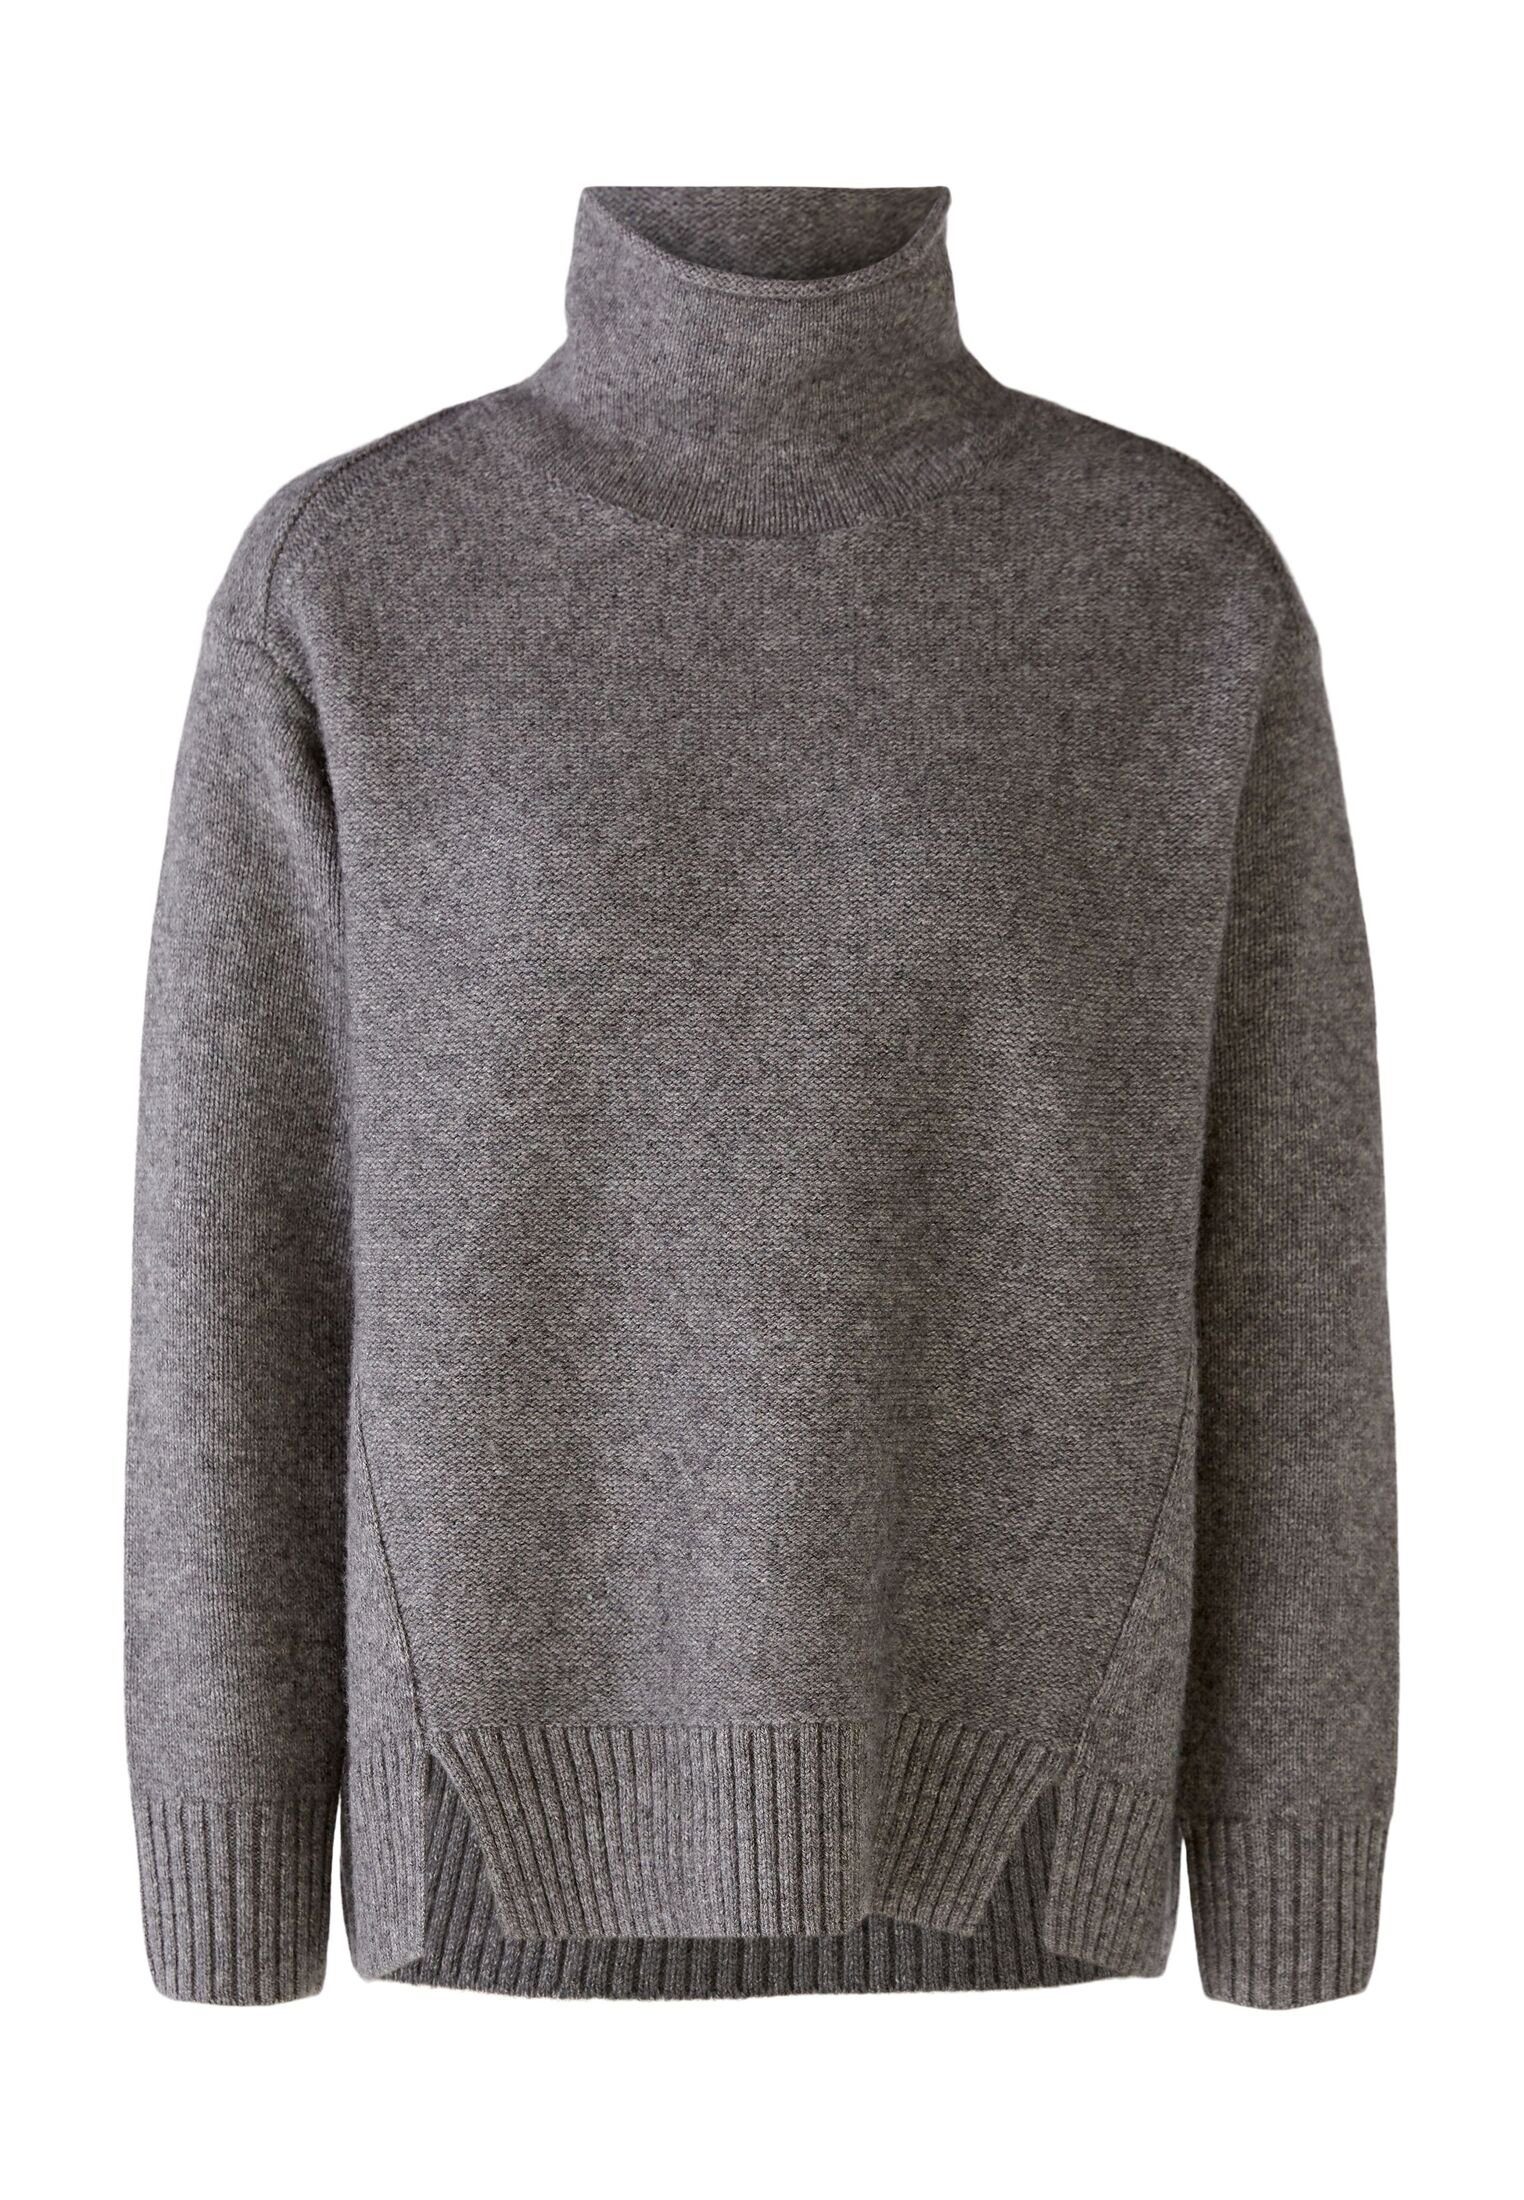 Strickpullover Wollmischung Pullover Oui grey